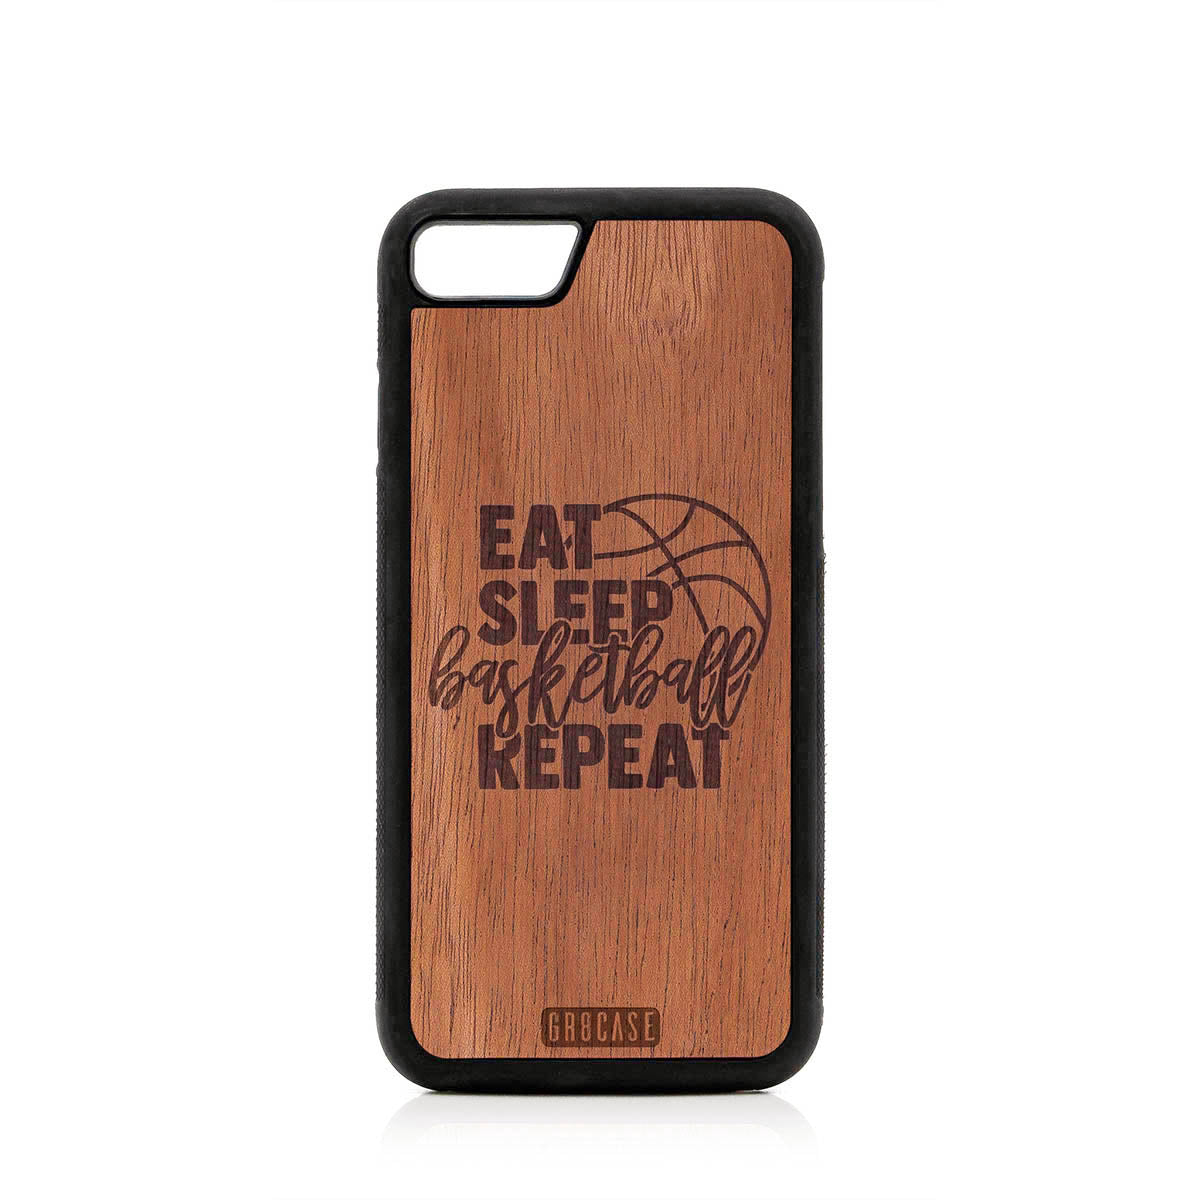 Eat Sleep Basketball Repeat Design Wood Case For iPhone SE 2020